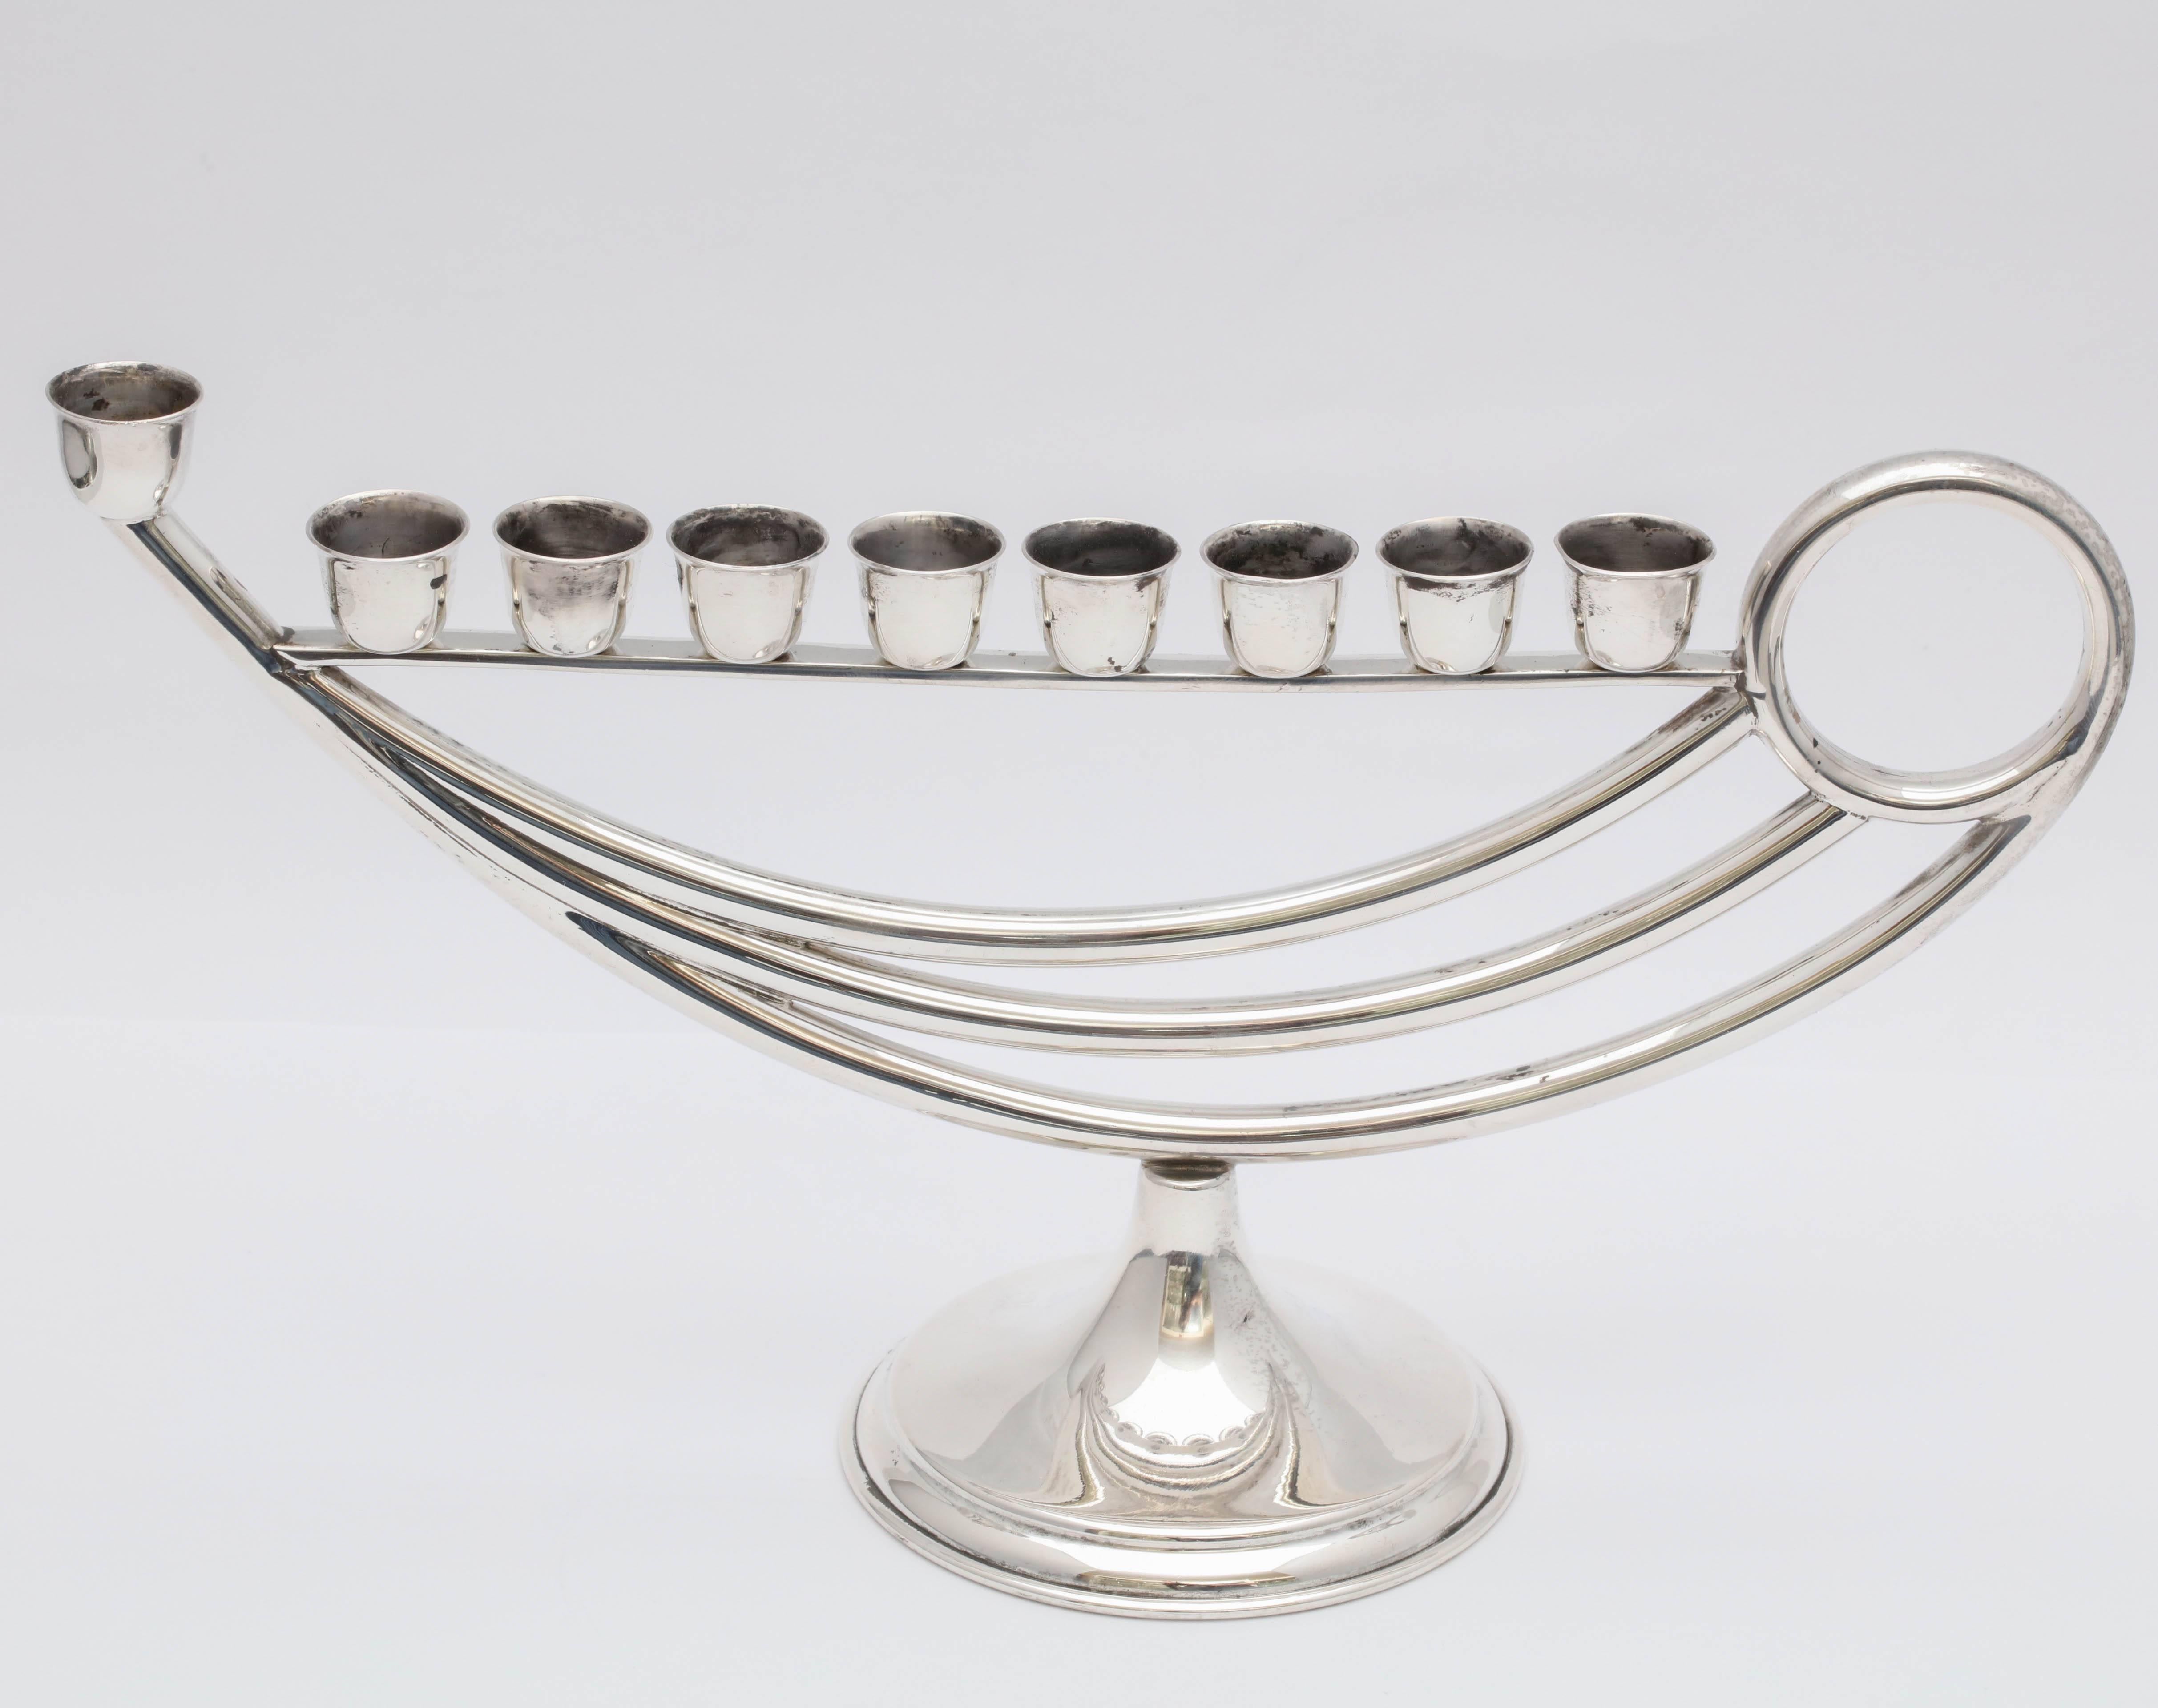 Unusual, sterling silver, midcentury, oil lamp - shaped menorah, Mexico, circa 1950s-1960s. Graceful design. Each candle cup is separately screwed into the menorah. Measures: 10 inches long x 5 3/4 inches high (at highest point) x 3 1/2 inches